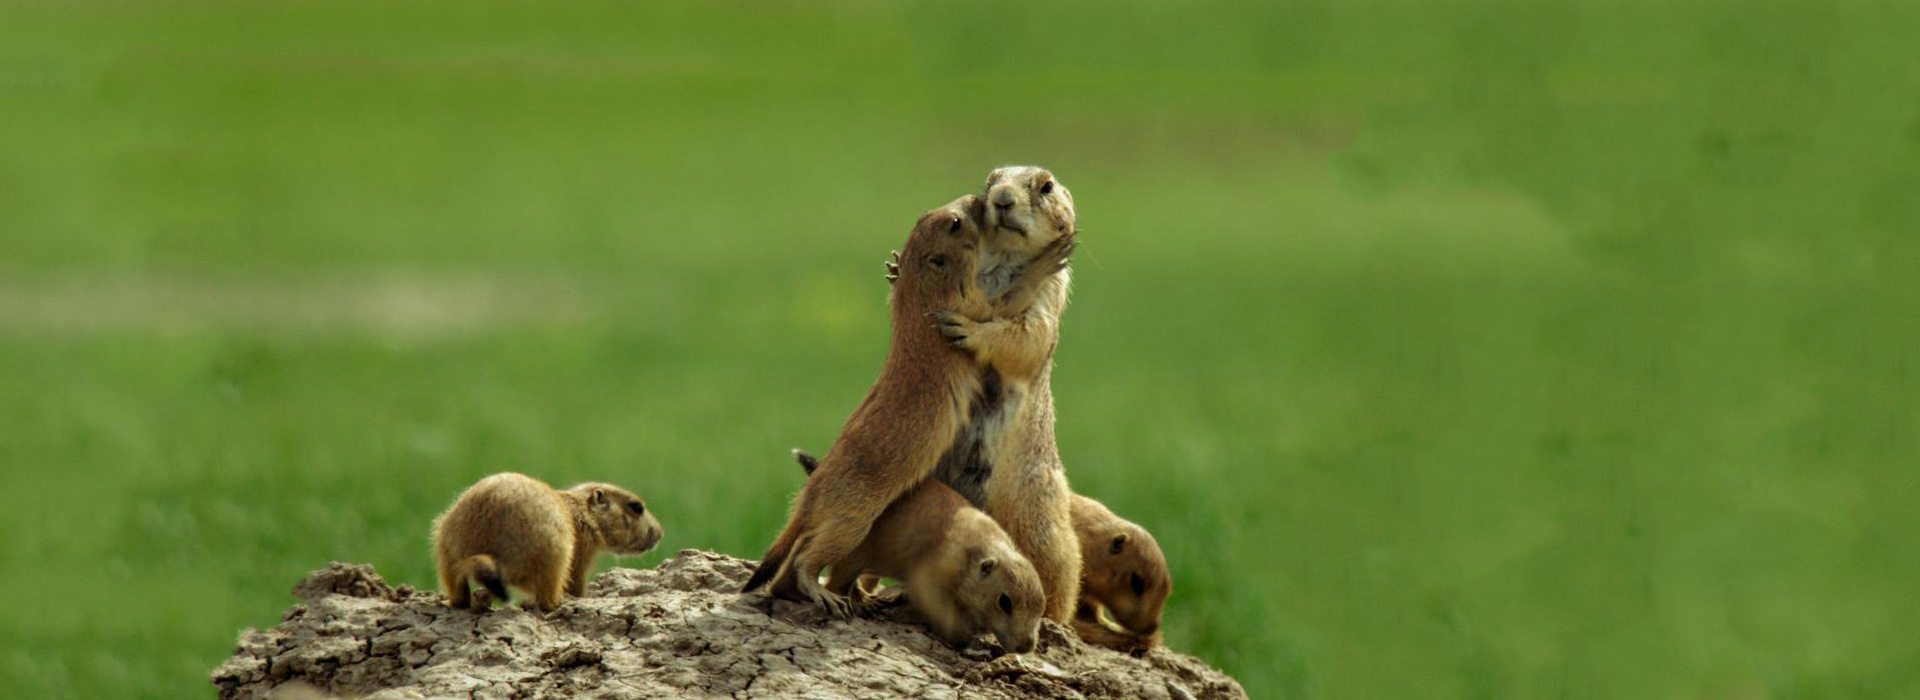 Movie poster The Wild West: A Prairie Dog's Life